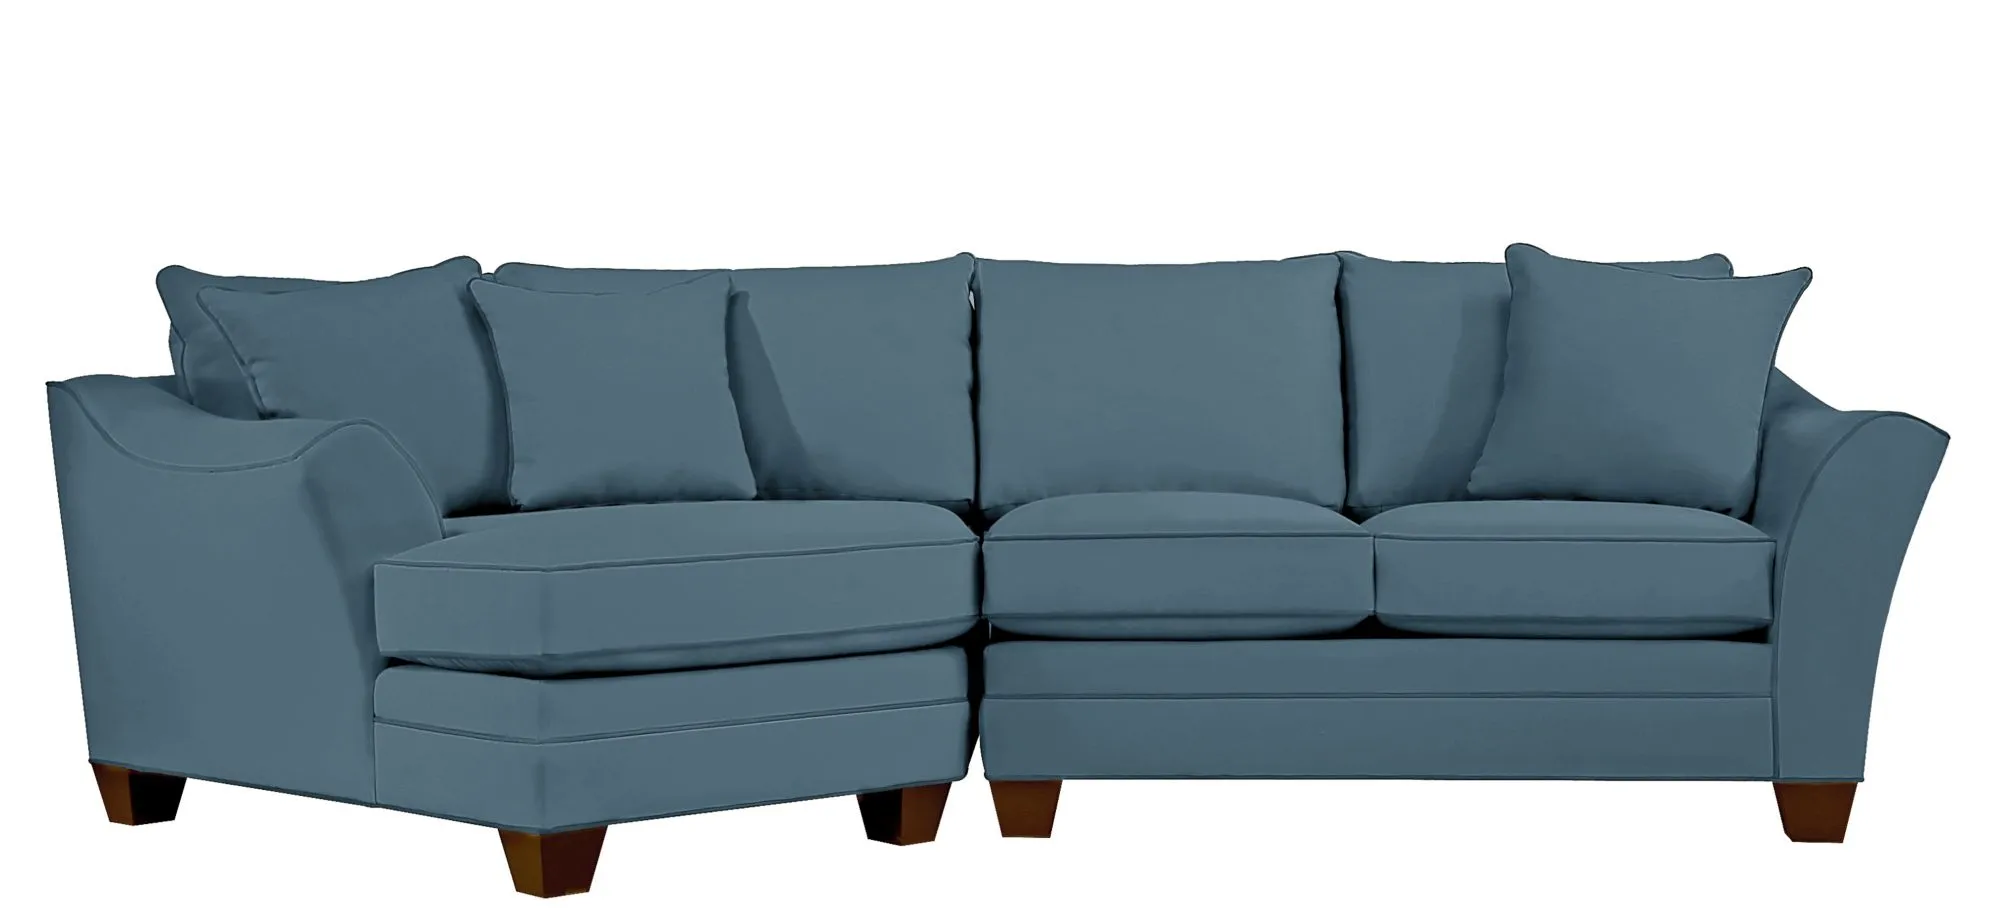 Foresthill 2-pc. Left Hand Cuddler Sectional Sofa in Suede So Soft Indigo by H.M. Richards